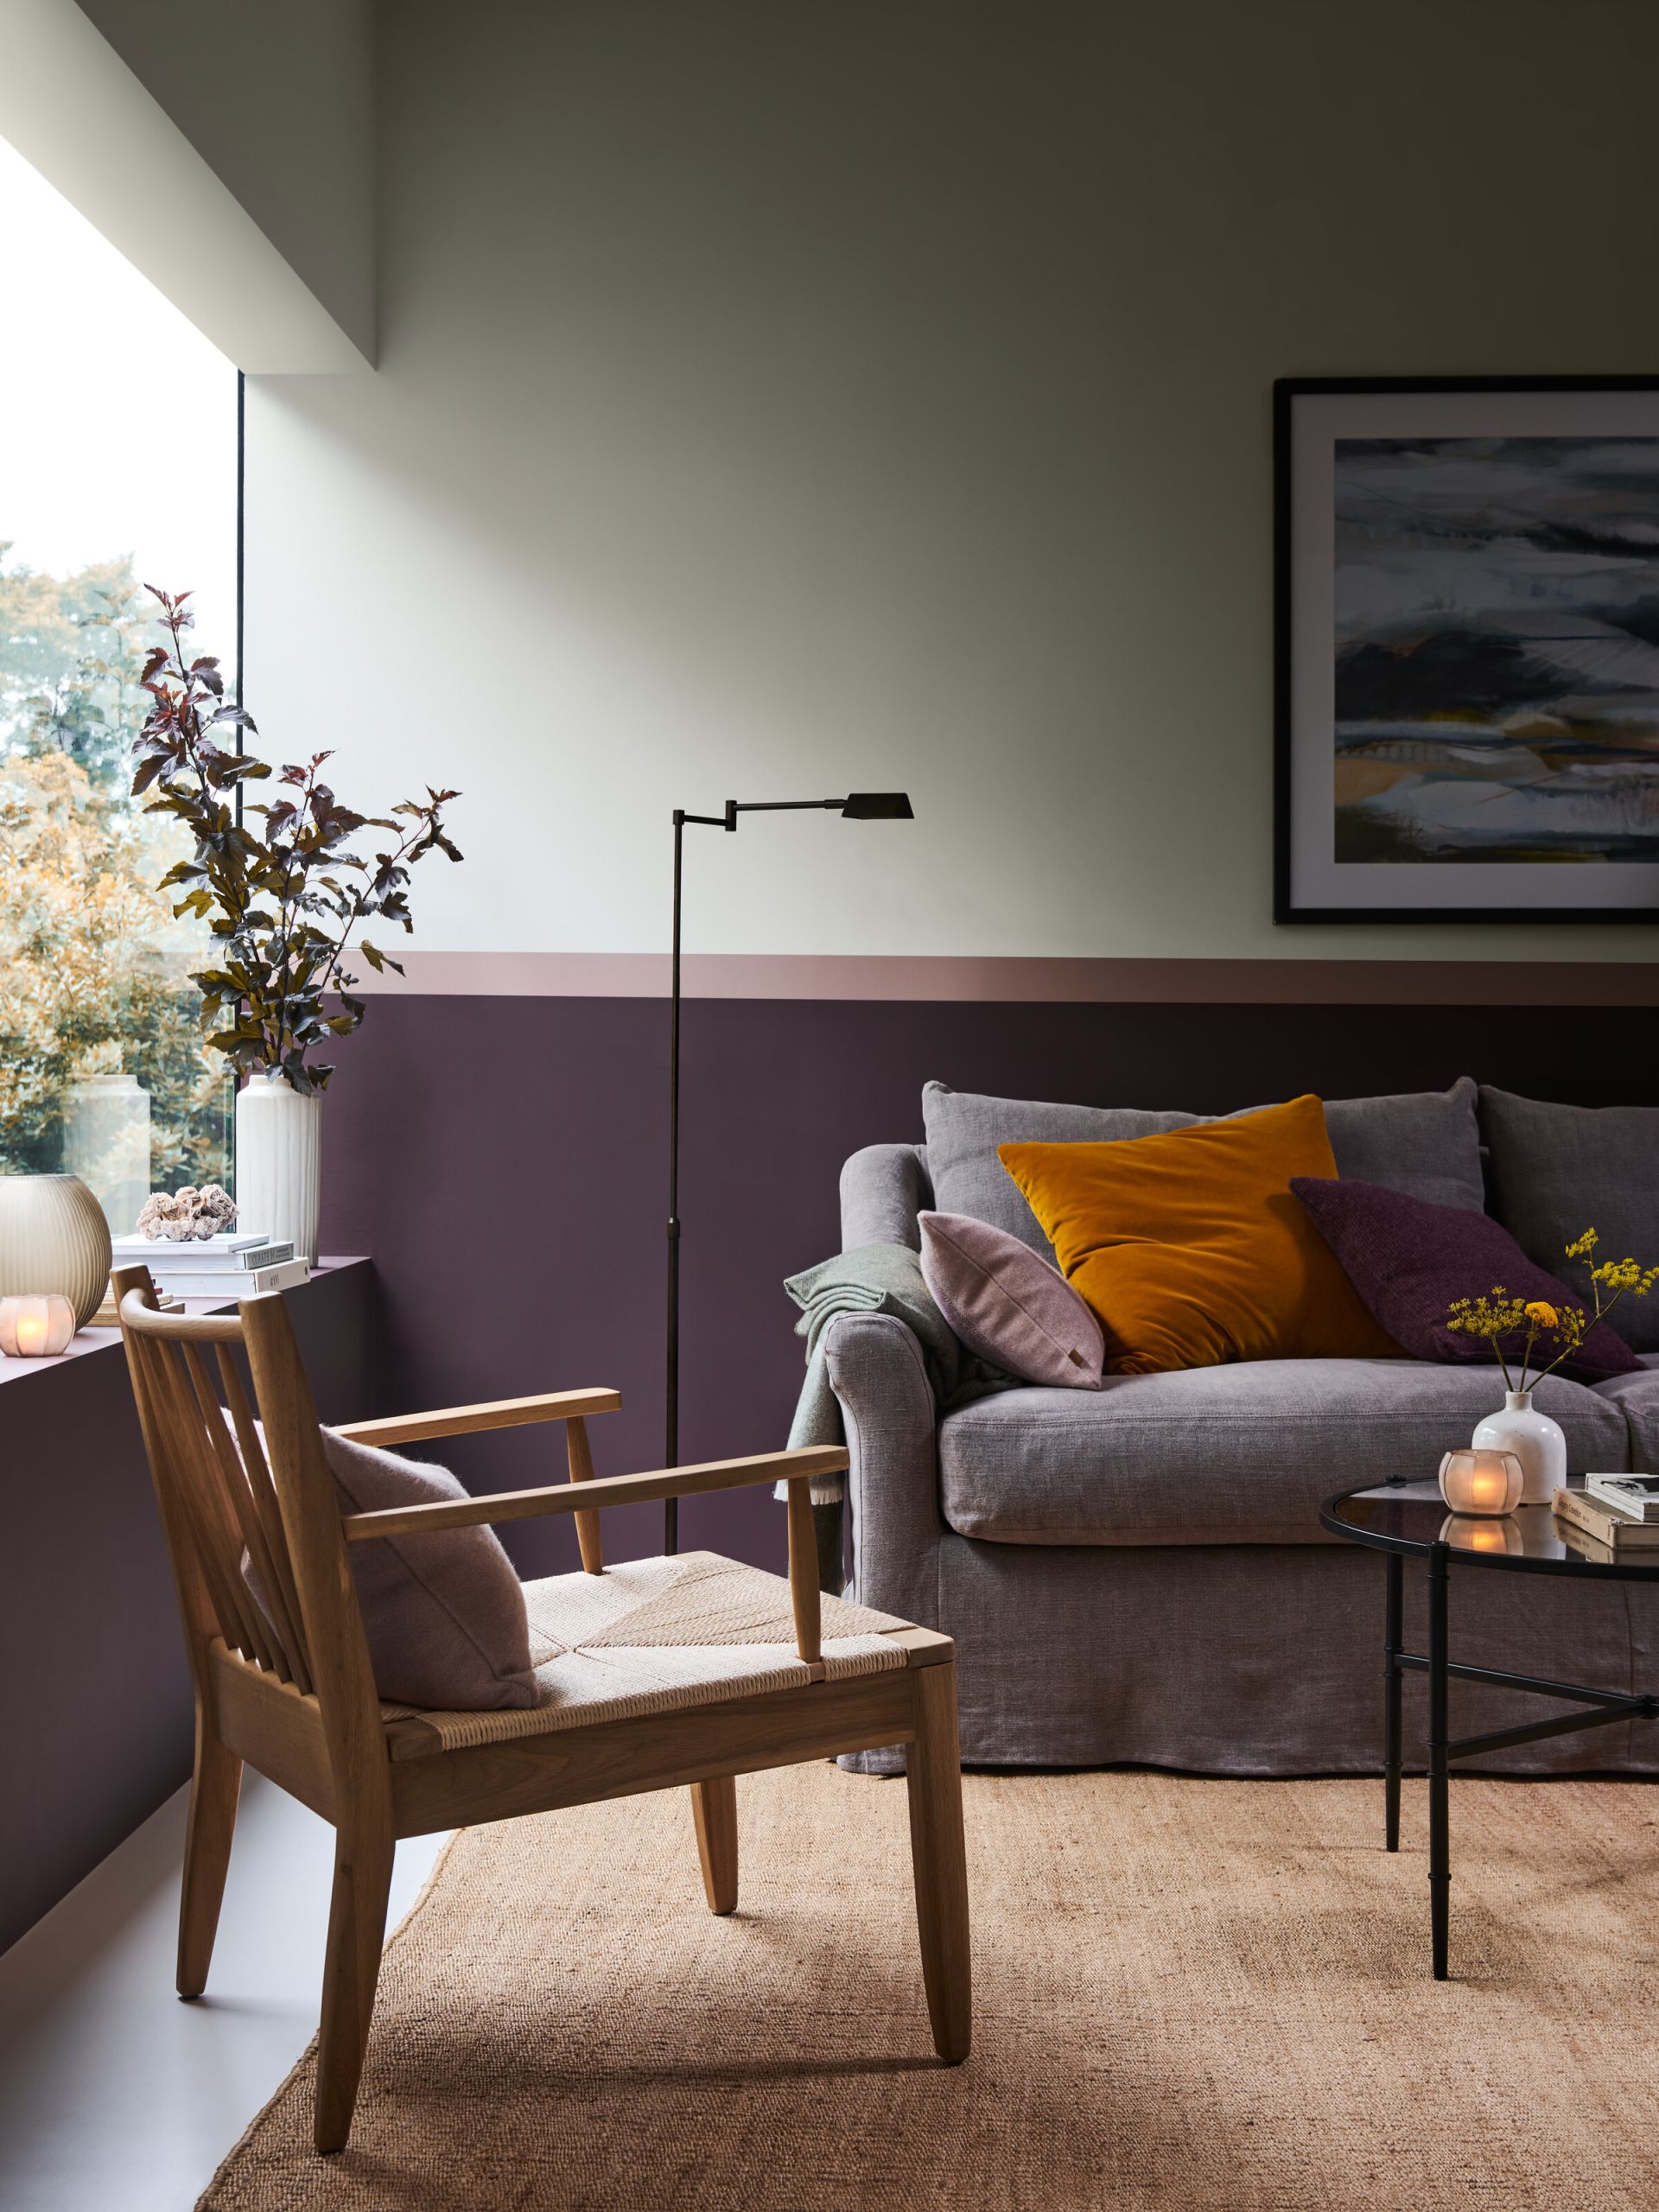 Decorating with purple – 10 ways to use this versatile shade